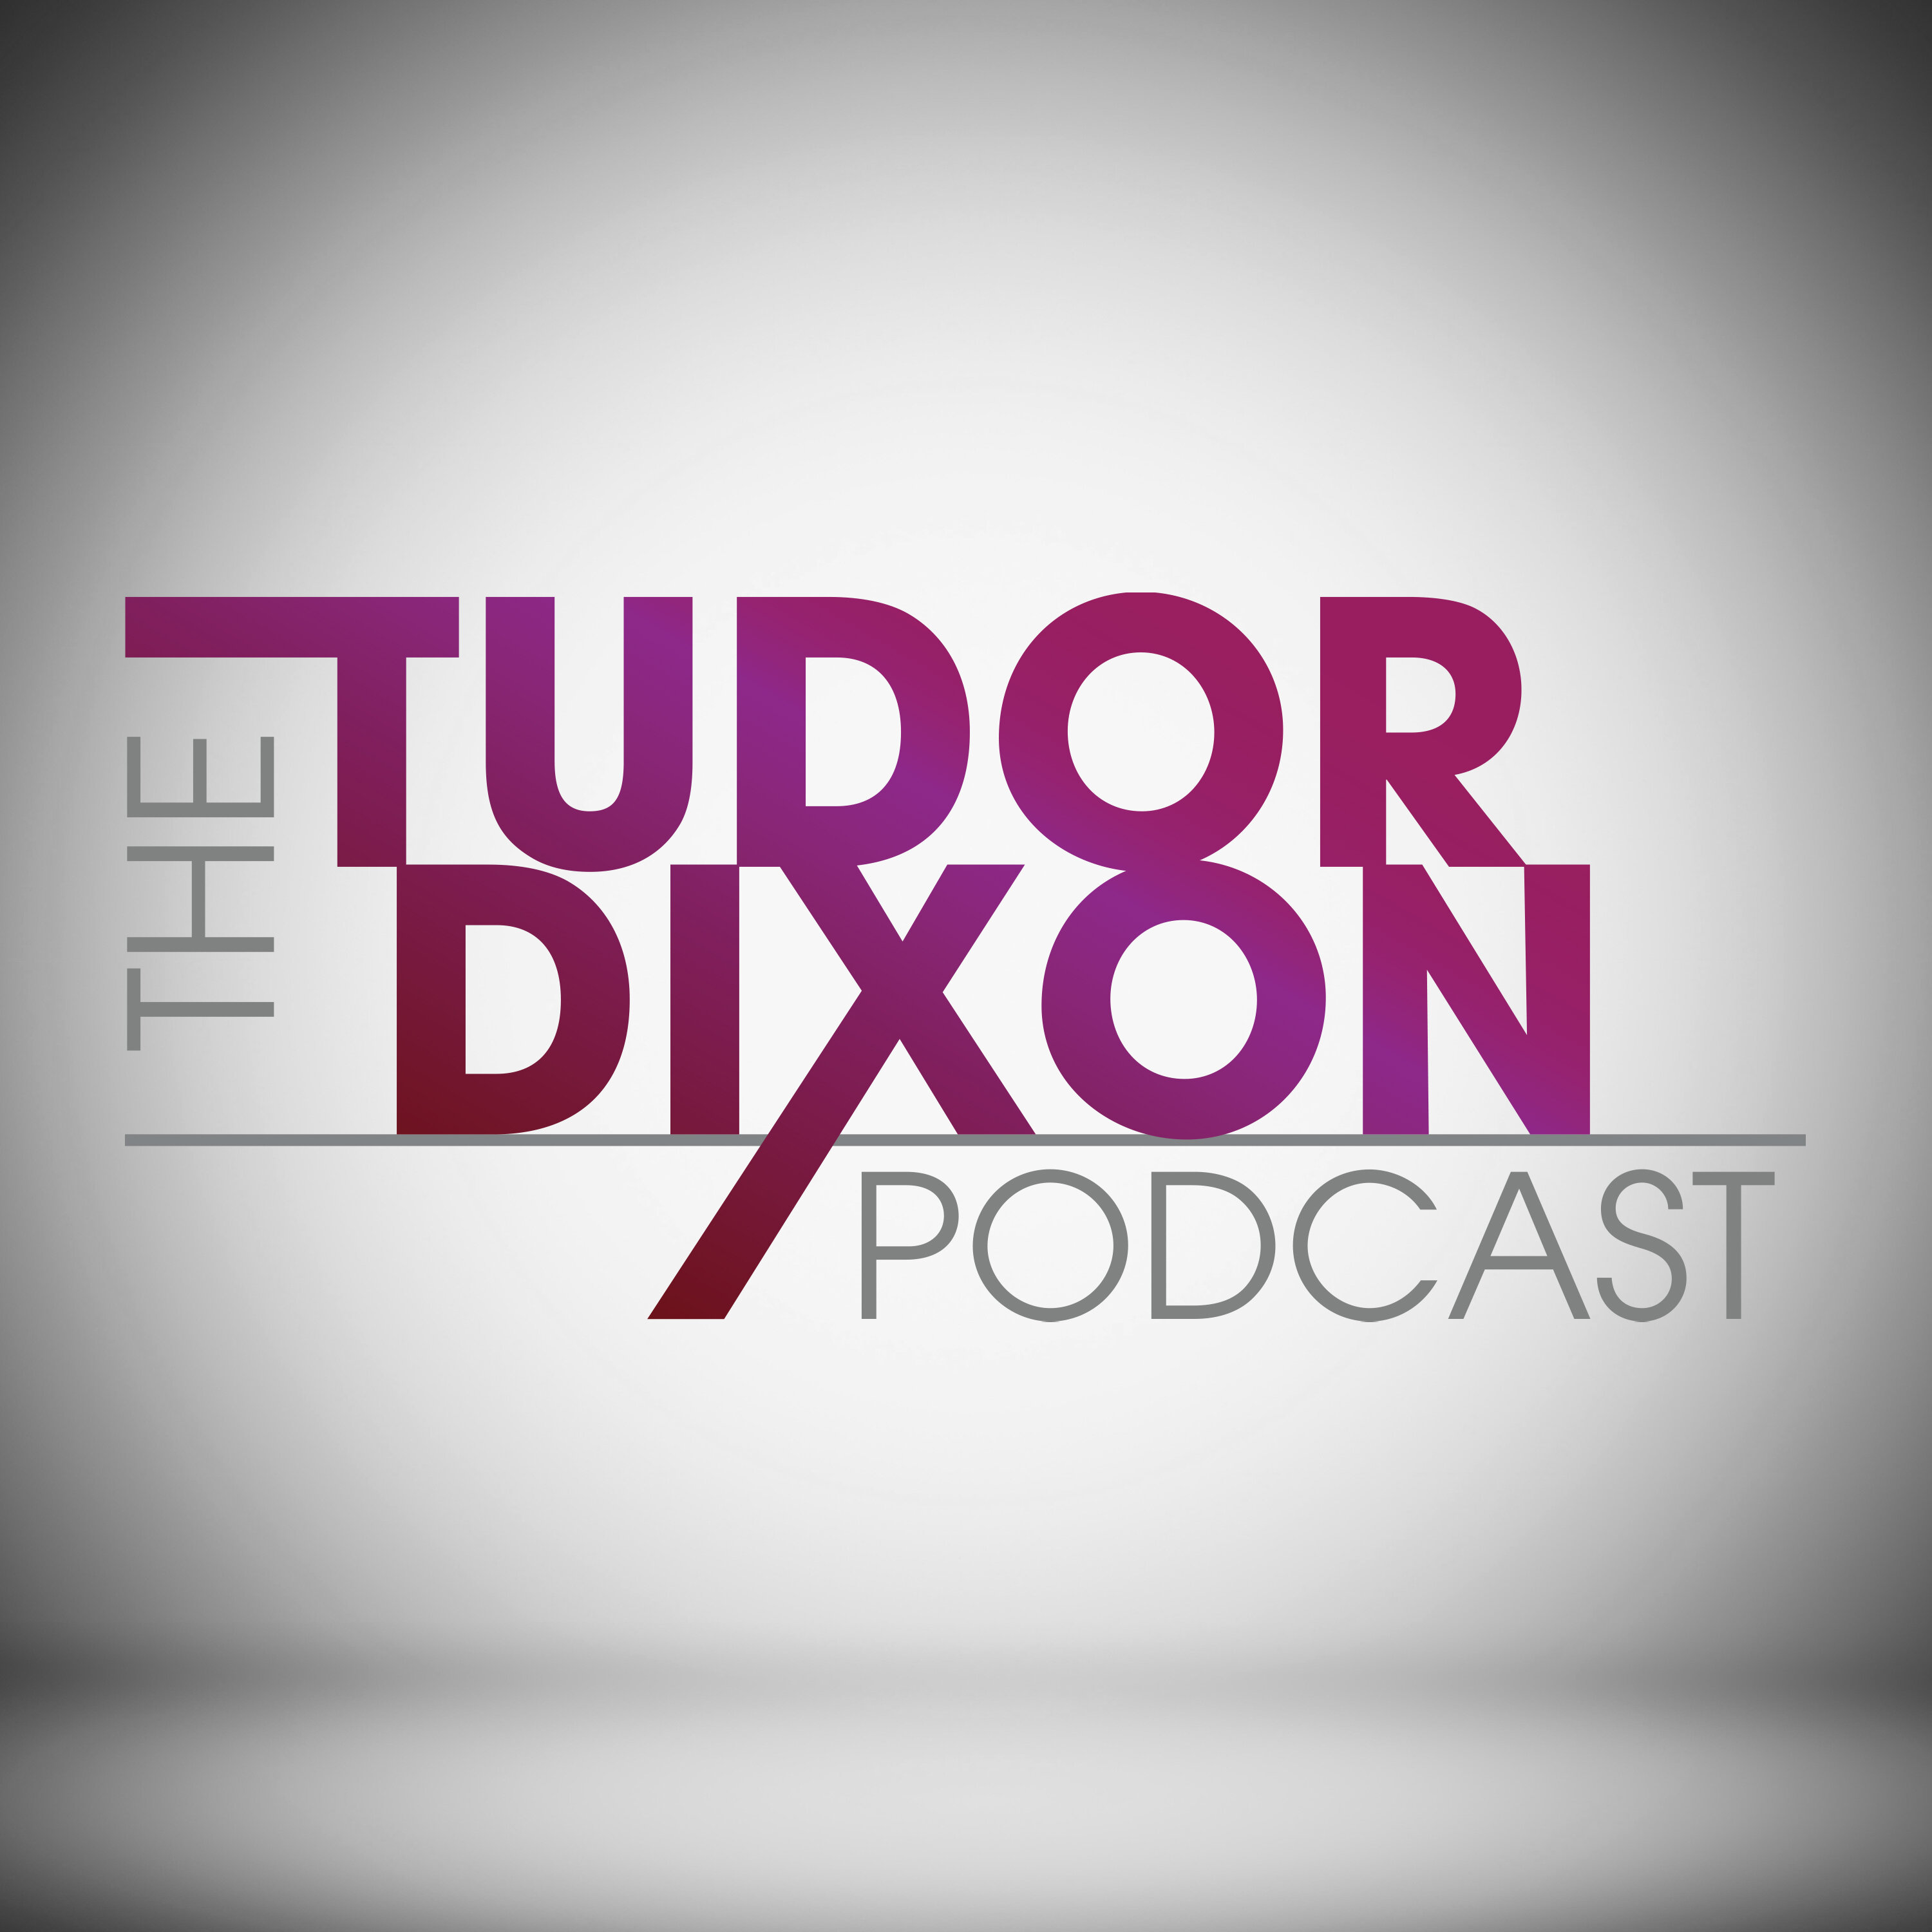 The Tudor Dixon Podcast: Buckets Over Bullying: Fighting Back Against Cyberbullying